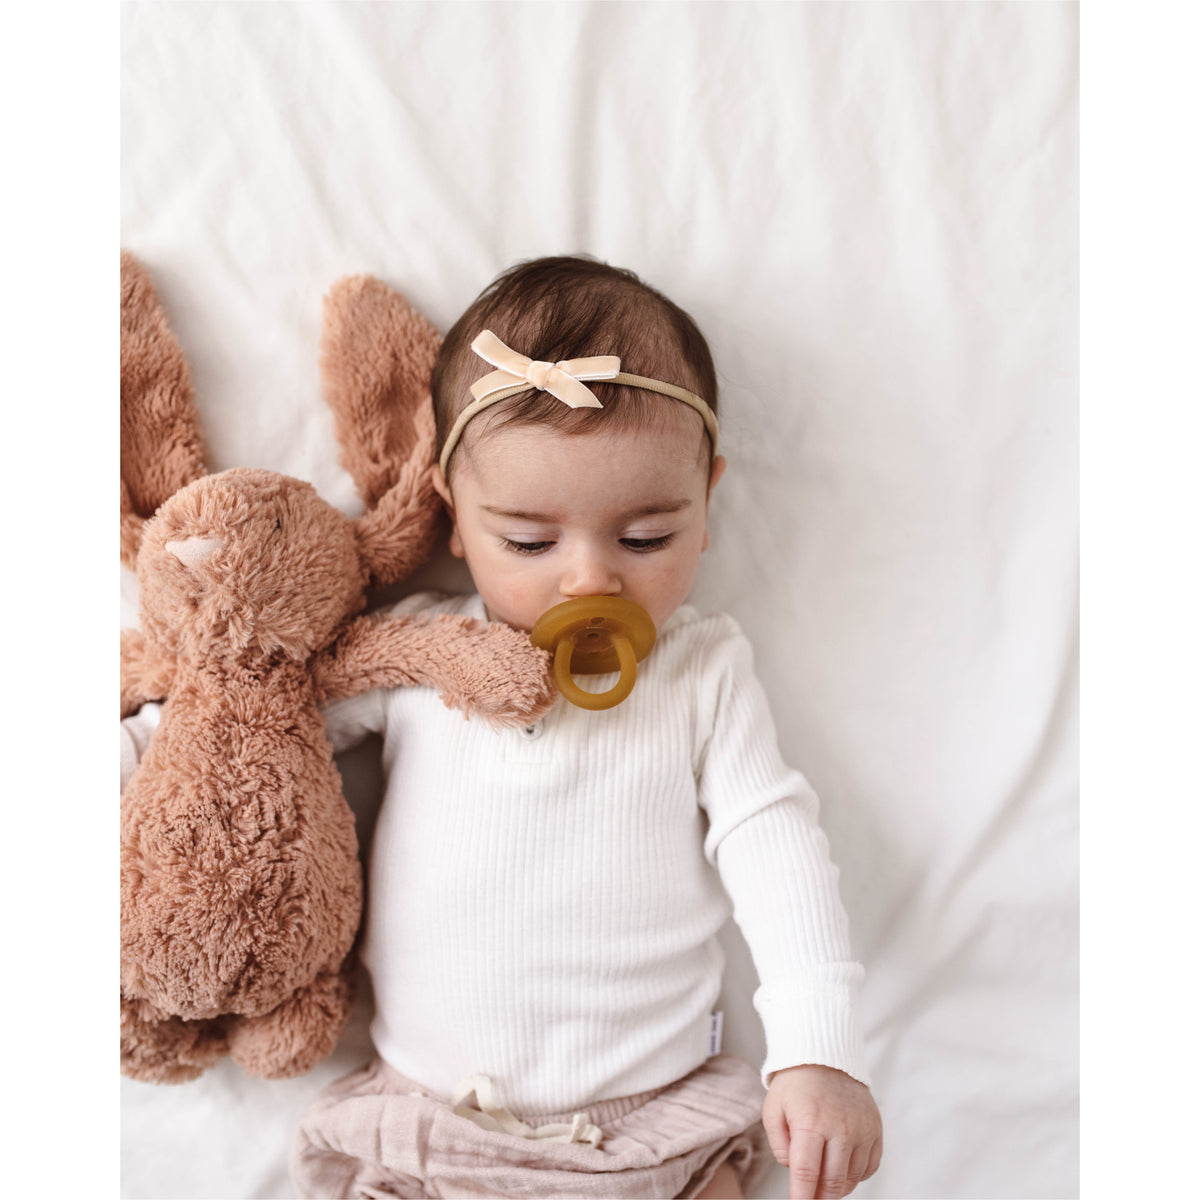 Twin Round Natural Rubber Soother | Dummy in Reusable Case